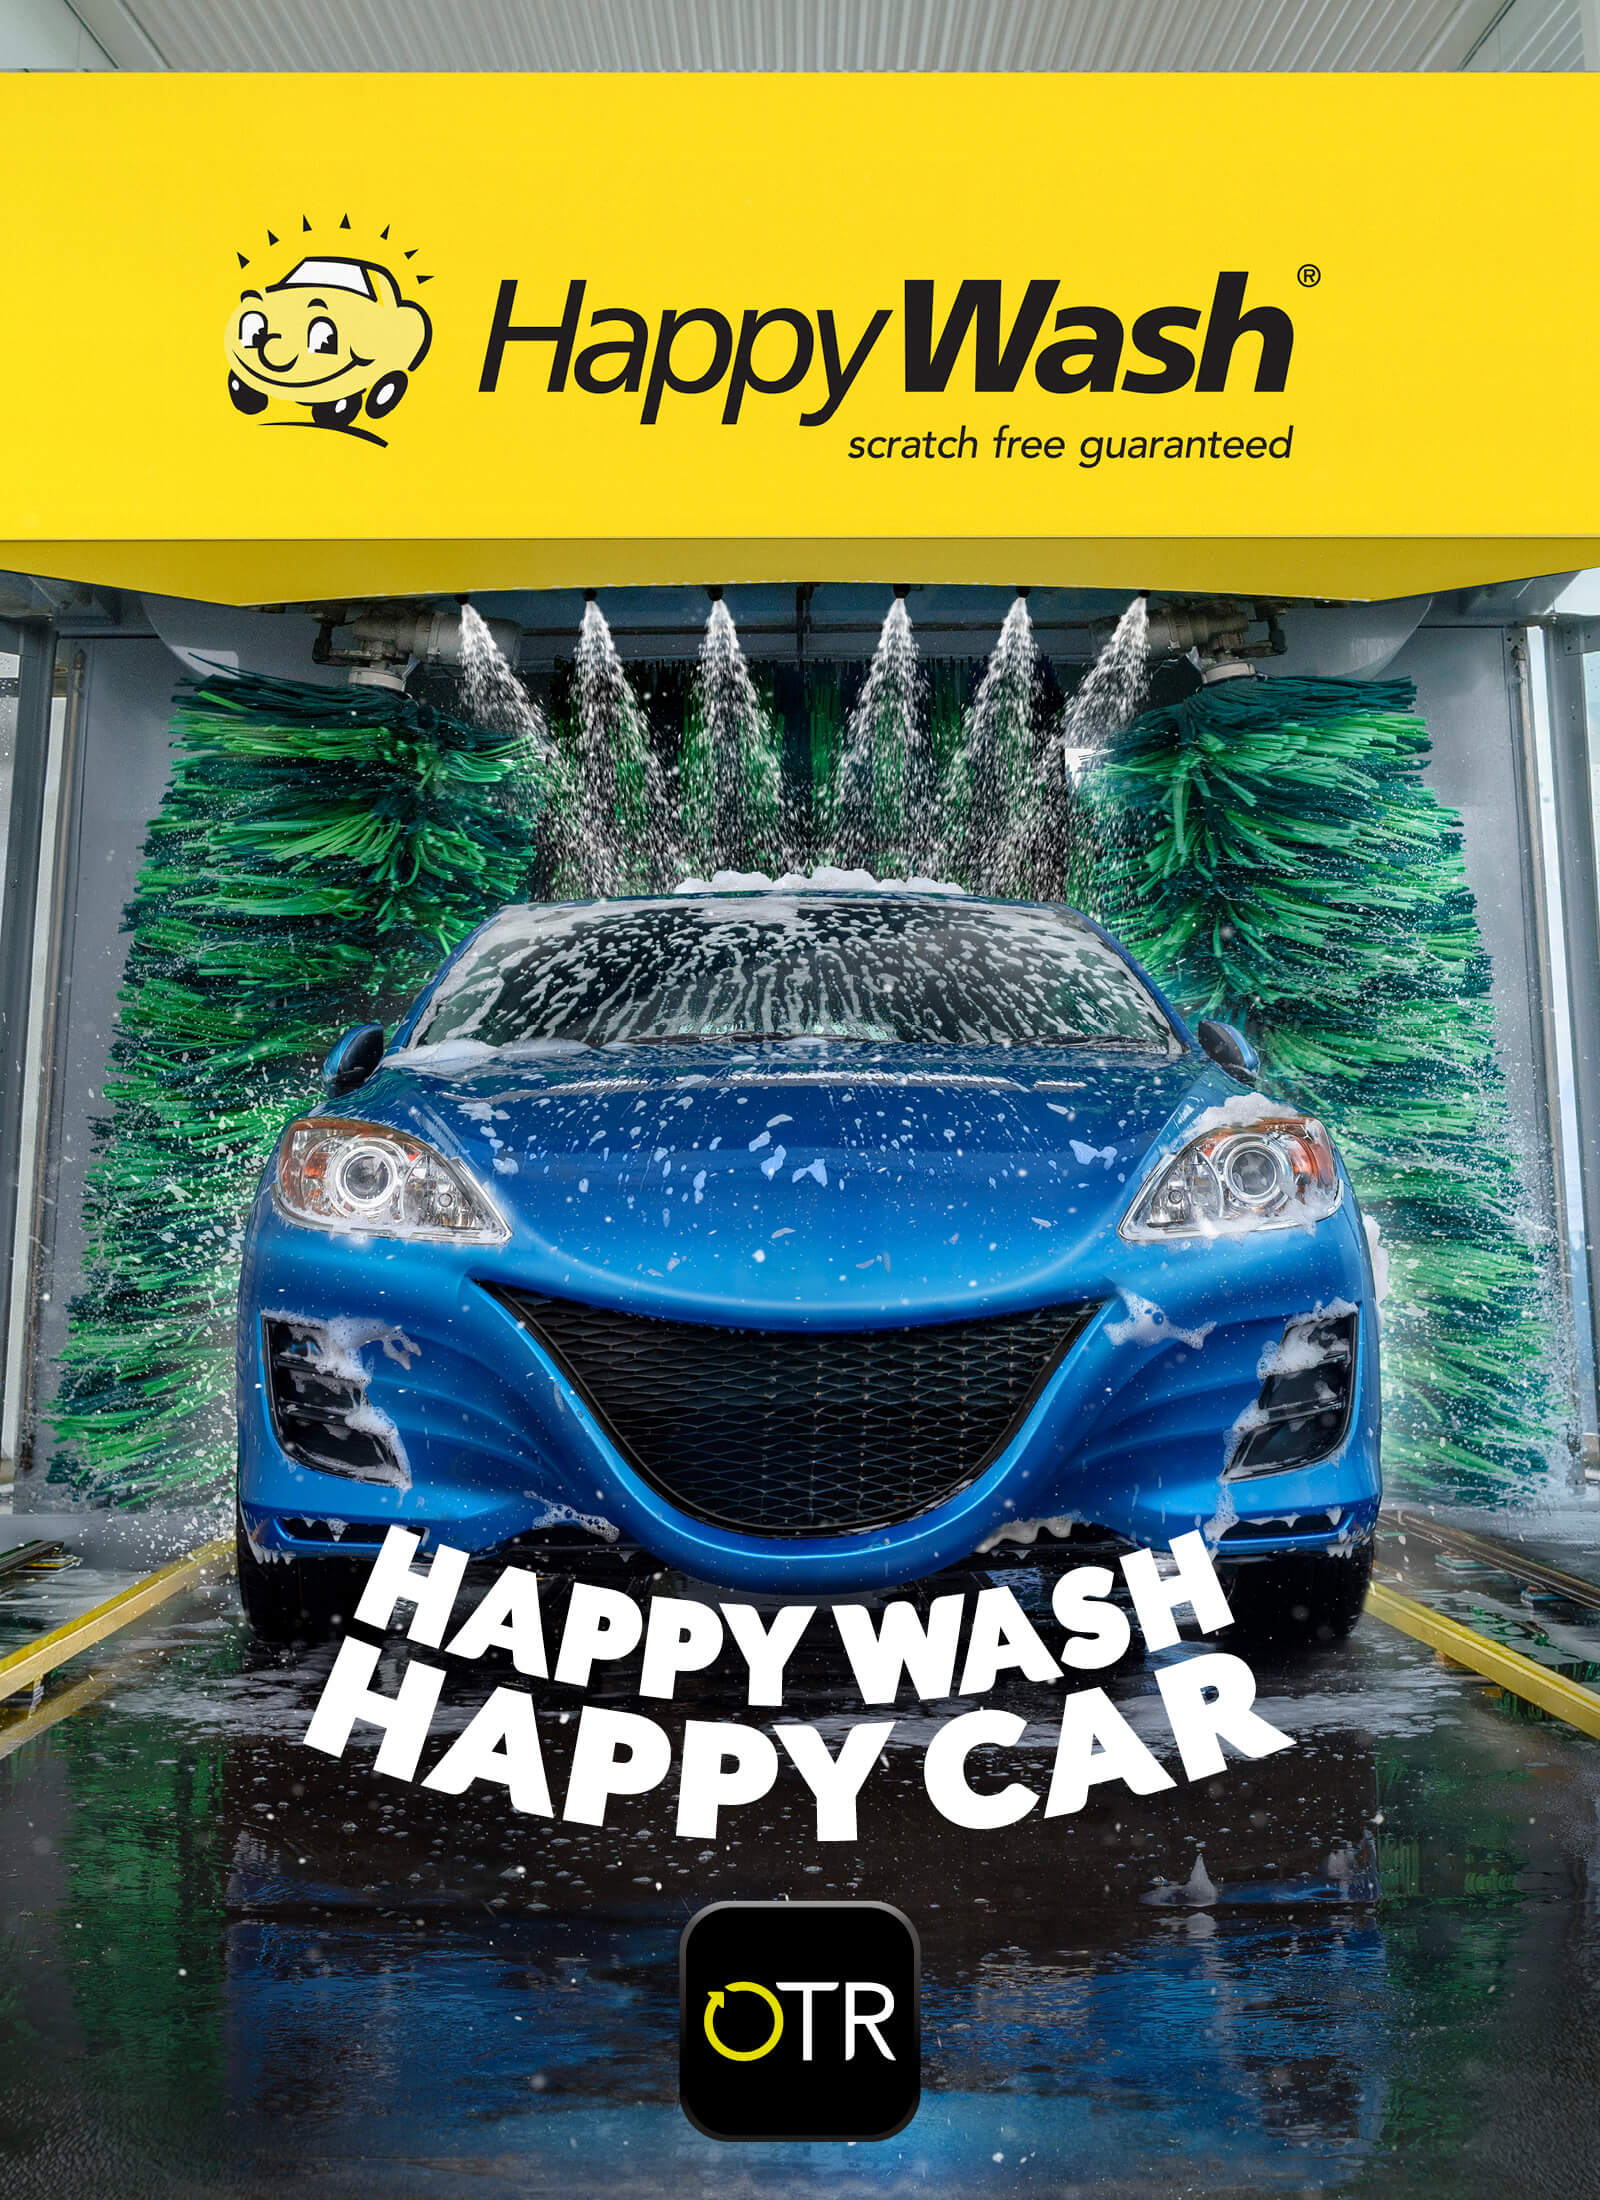 HappyWash - Available only at OTR